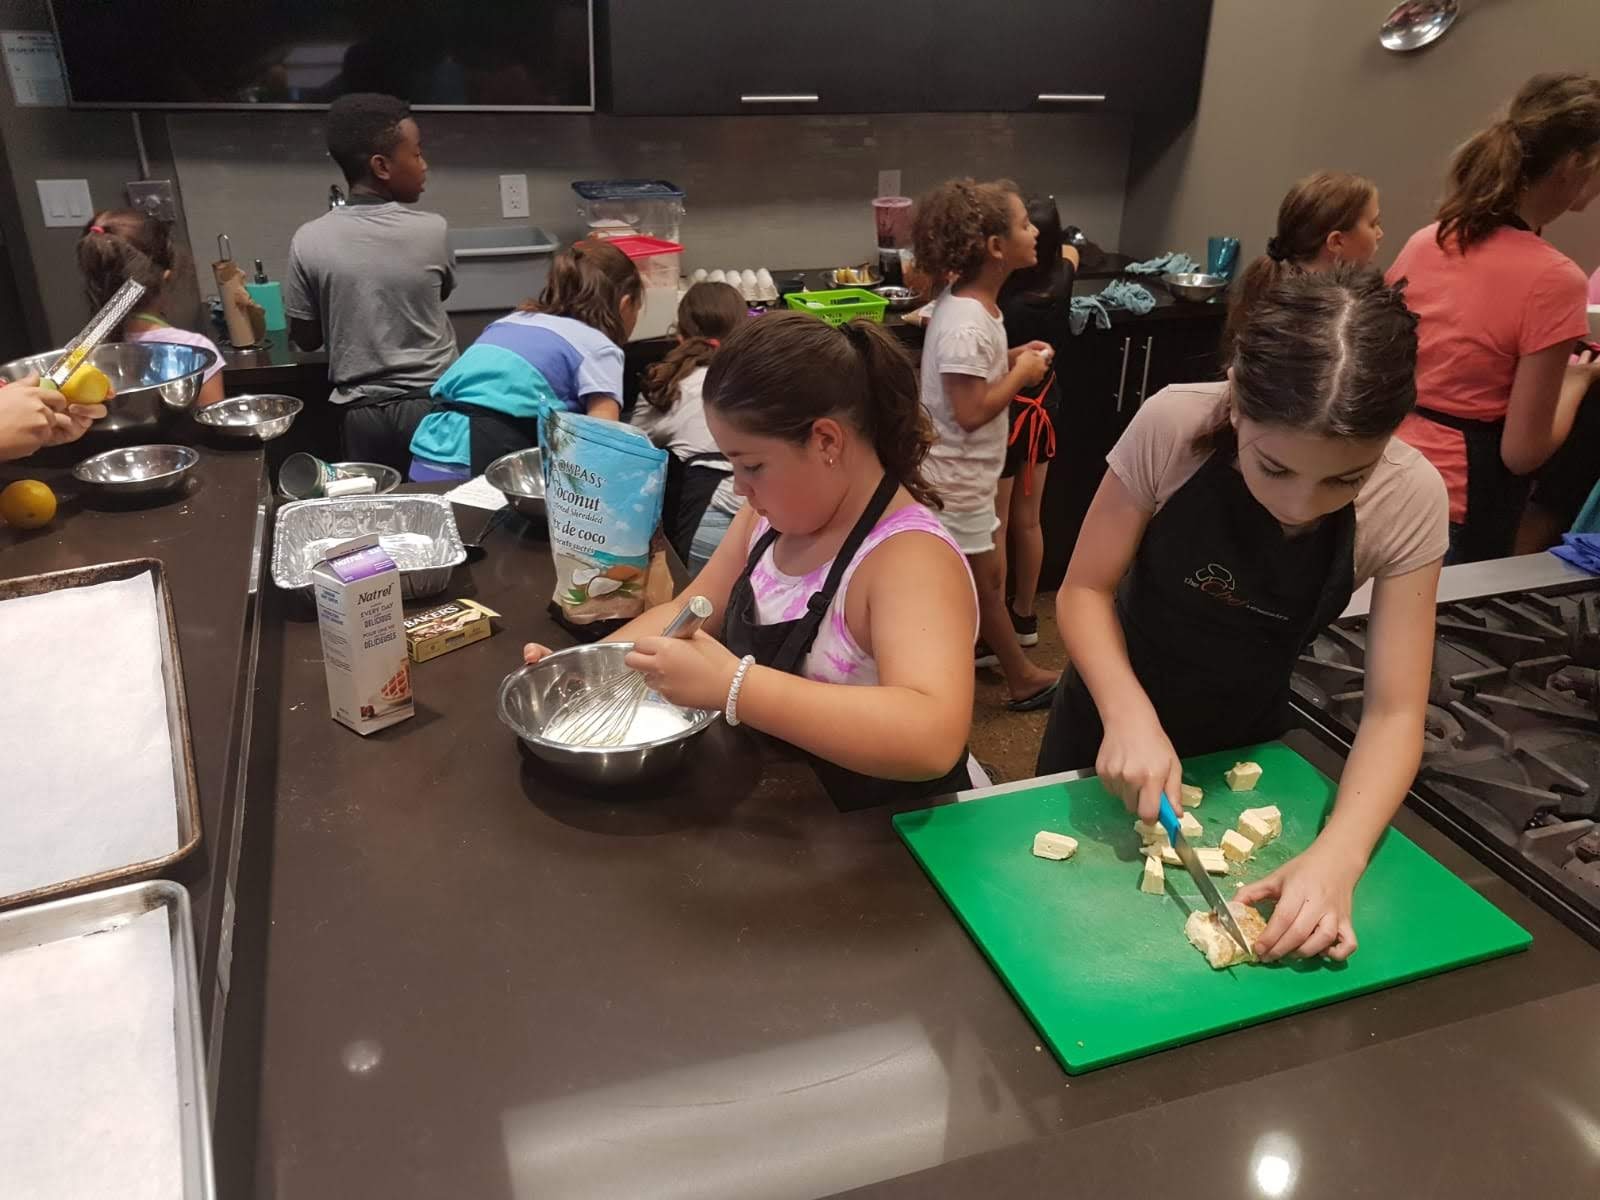 Midtown - Teen Cooking Classes - 5-week Spring Session - Tuesday March 28 - May 2 2023